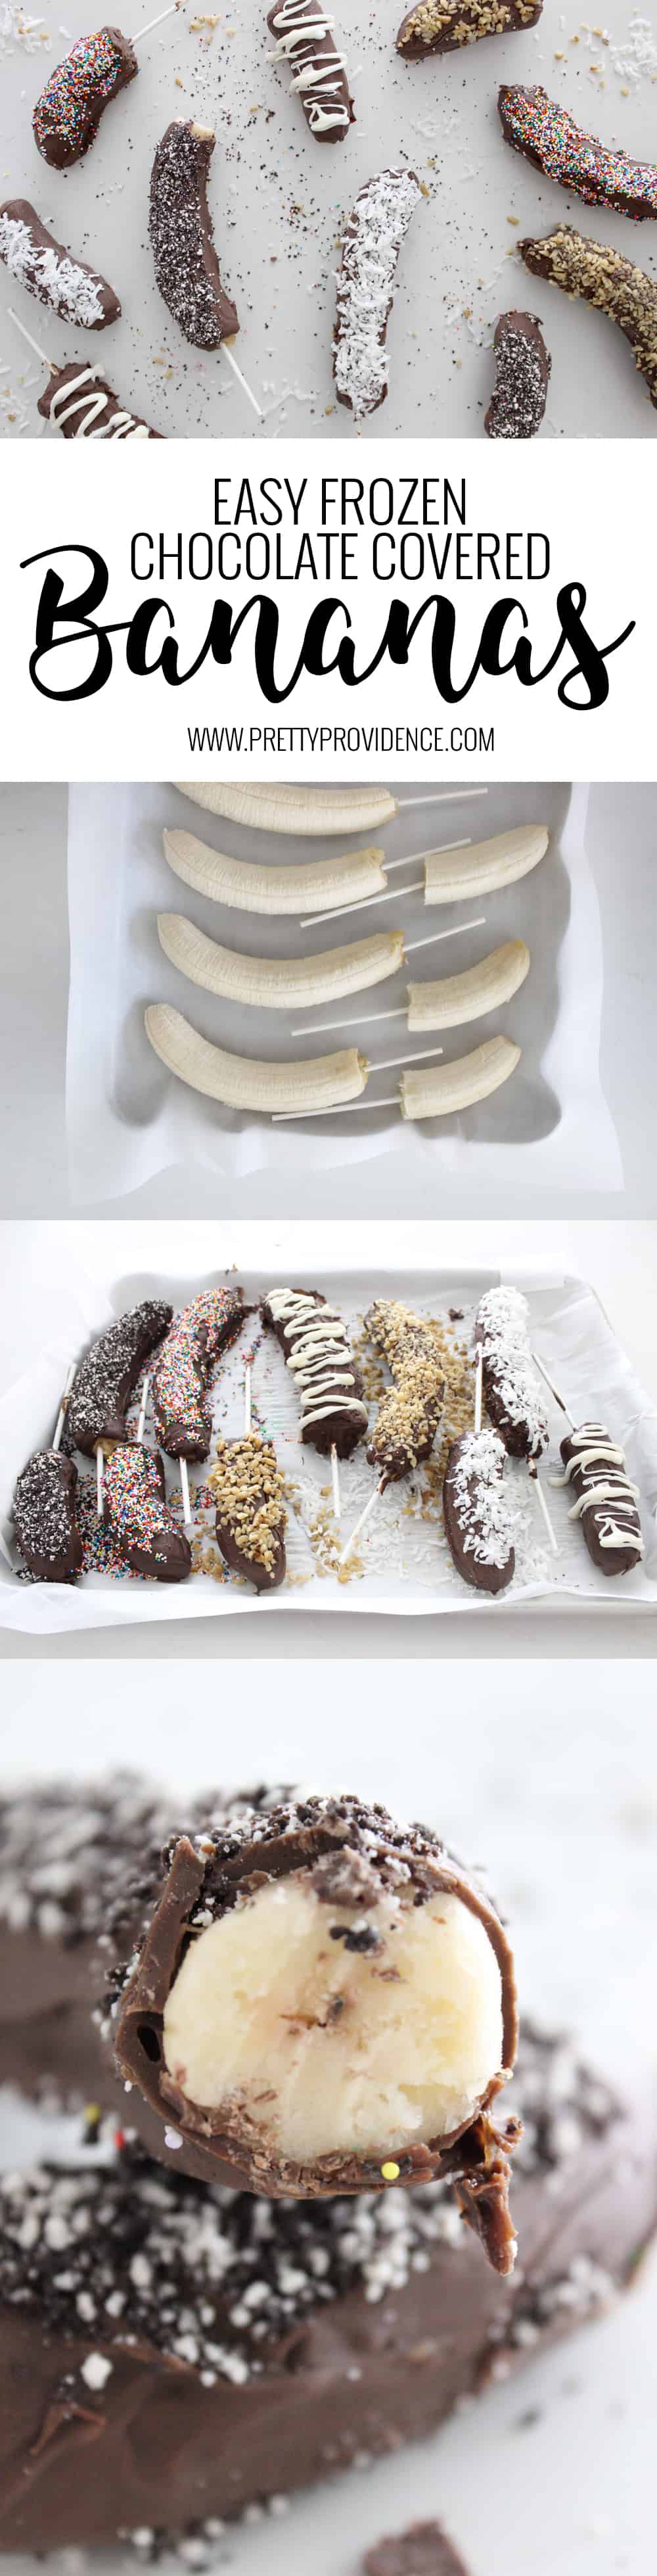 Not only are these frozen chocolate covered bananas easy to make, they are freaking delicious! Such a fun summer treat, and lots better for you than a regular ice cream bar!